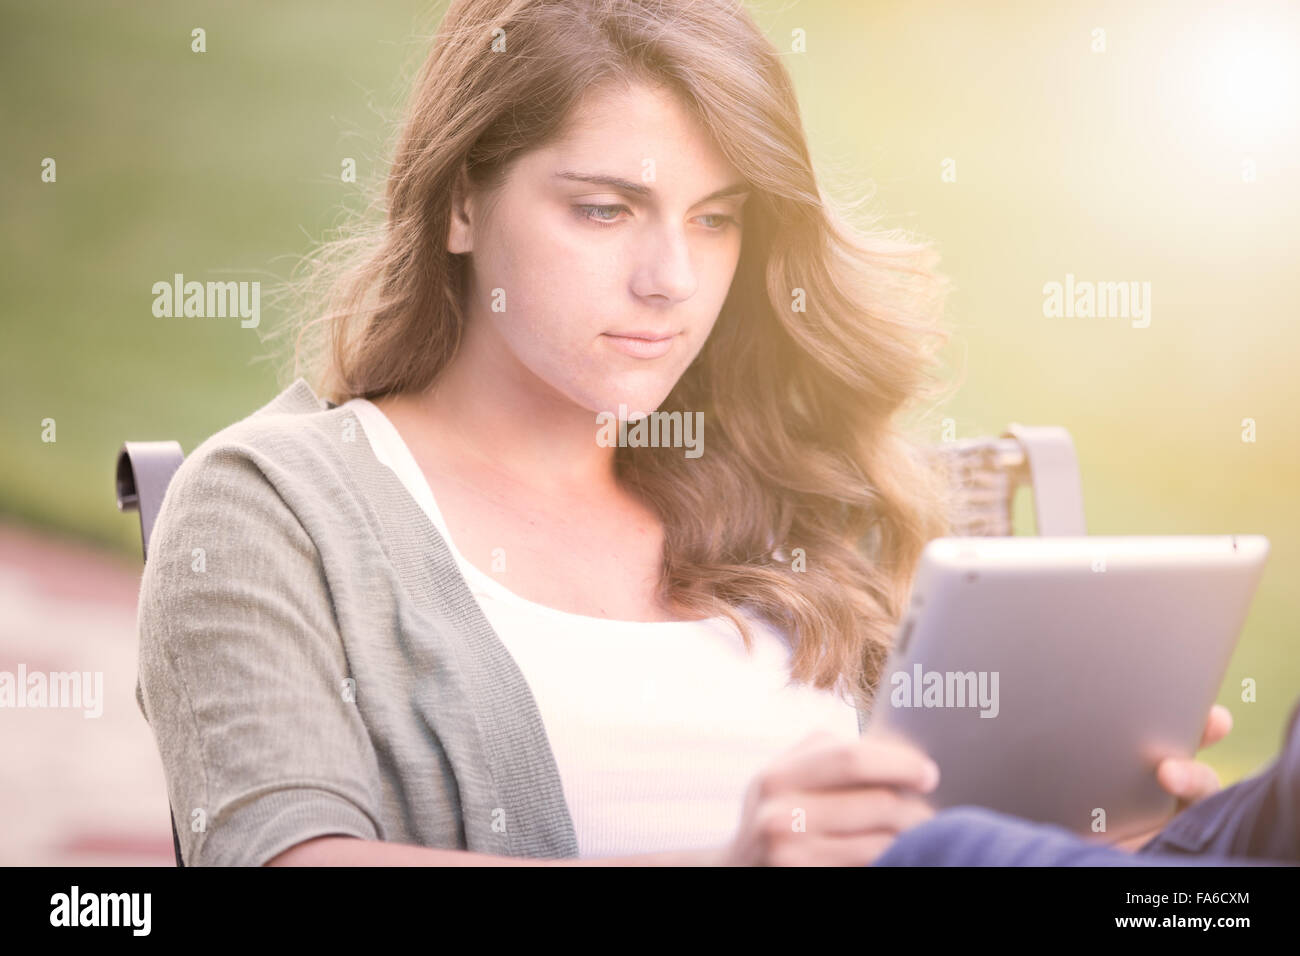 Teenage girl reading on a tablet Stock Photo